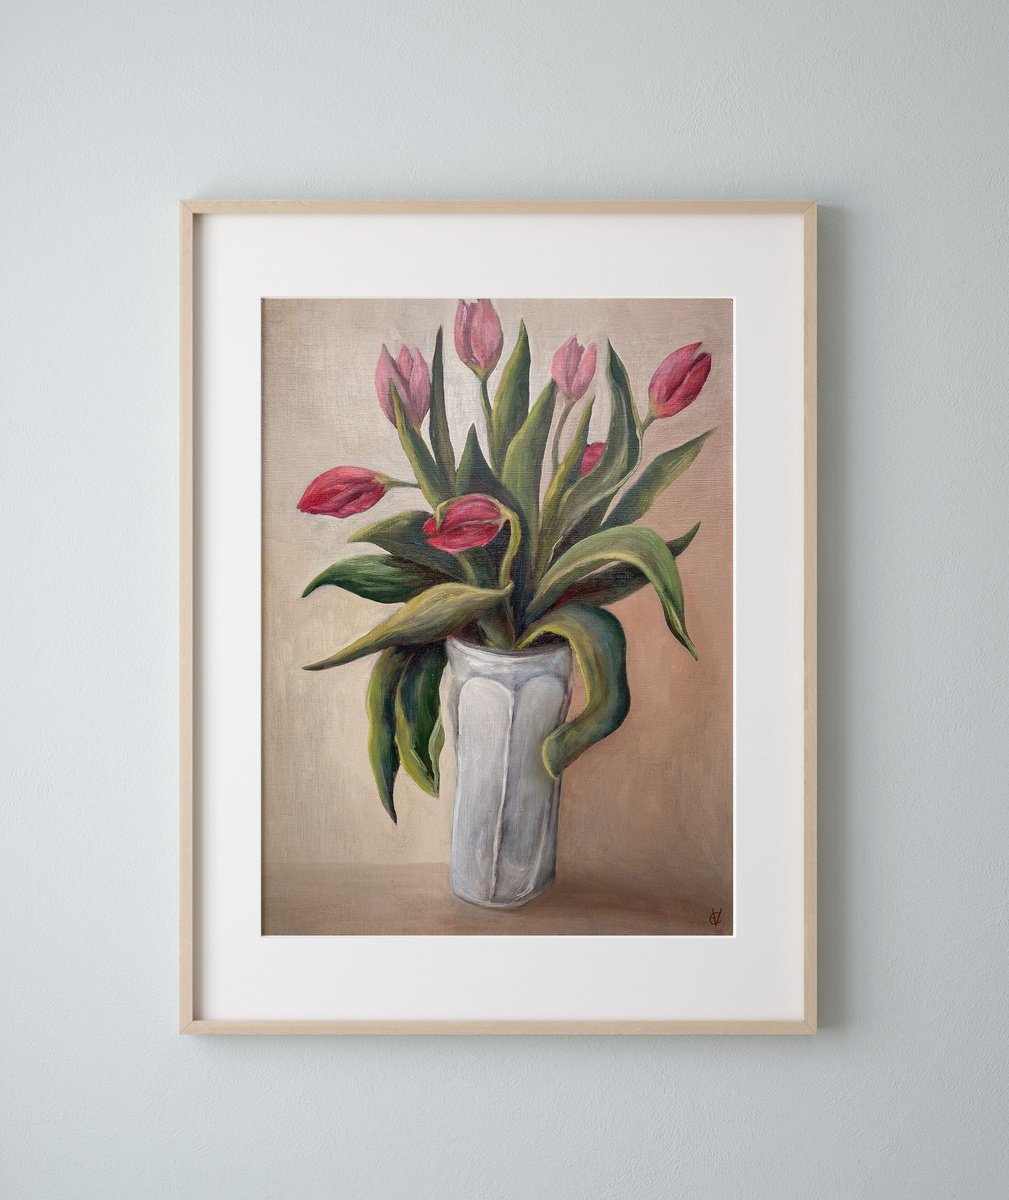 Tulips by Eve Devore